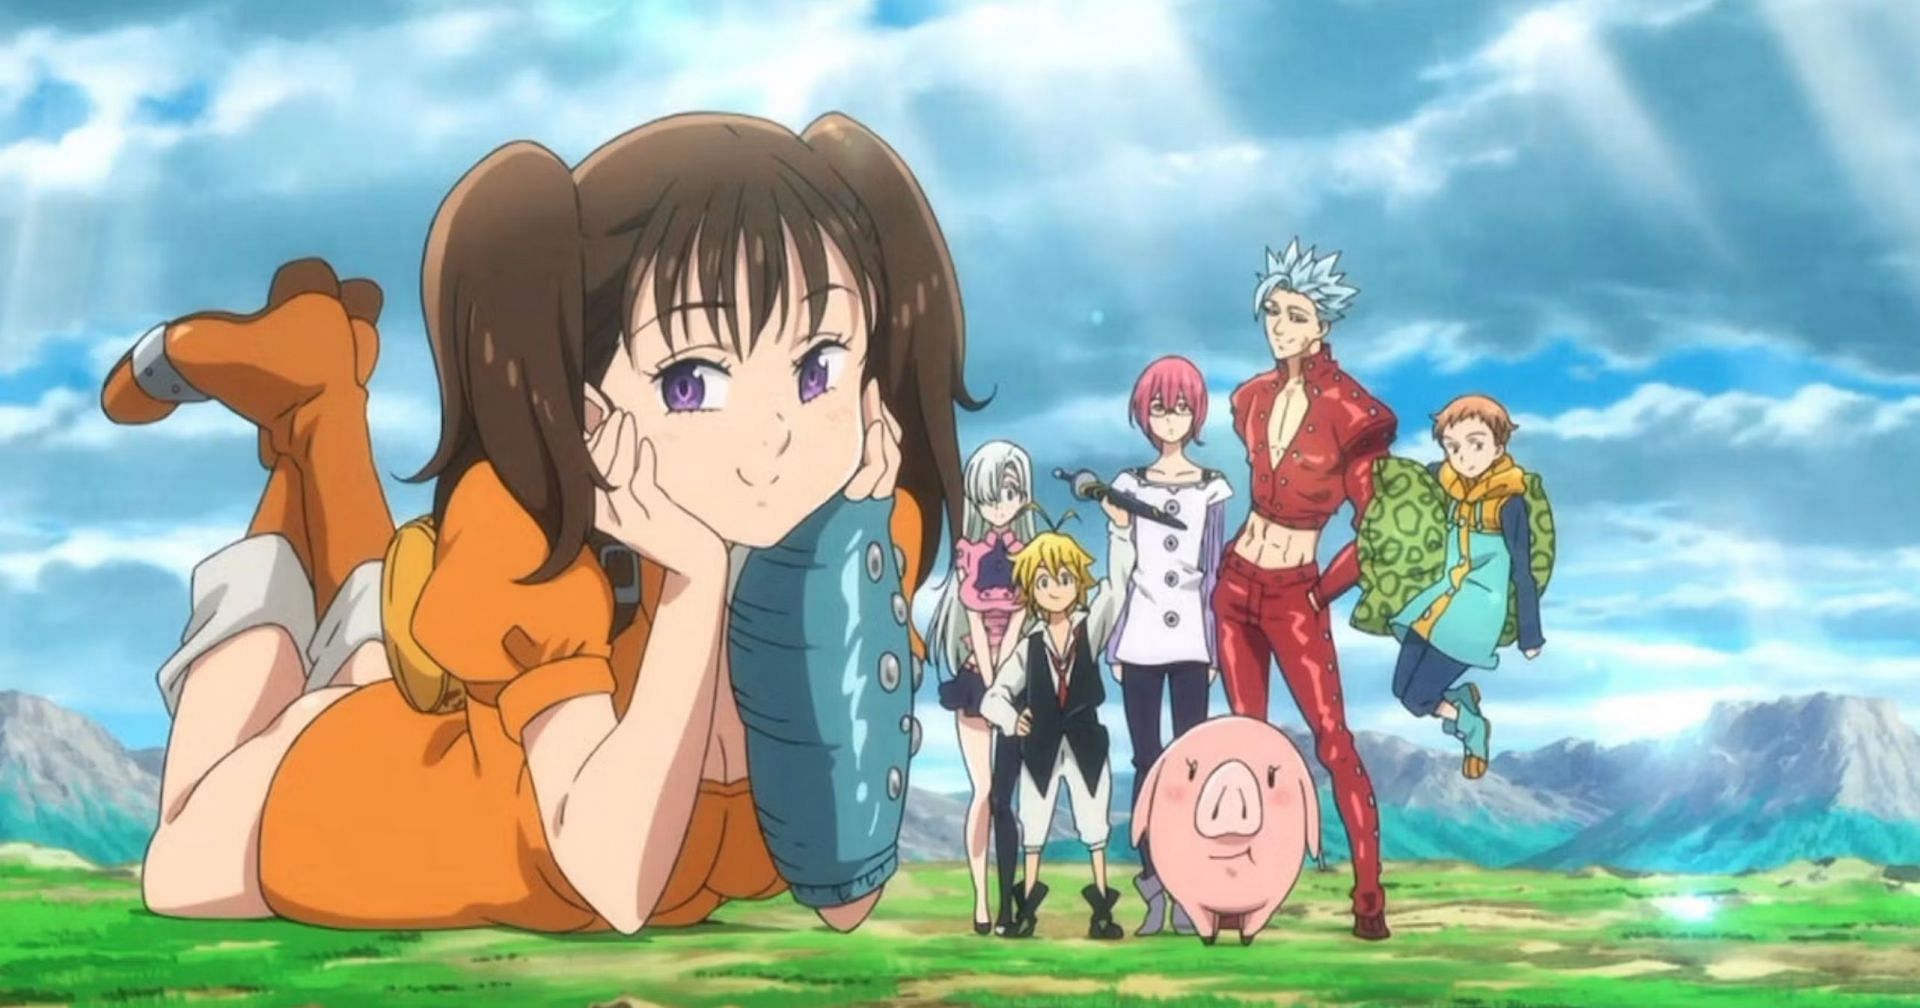 The group in the anime (image via Studio Deen)